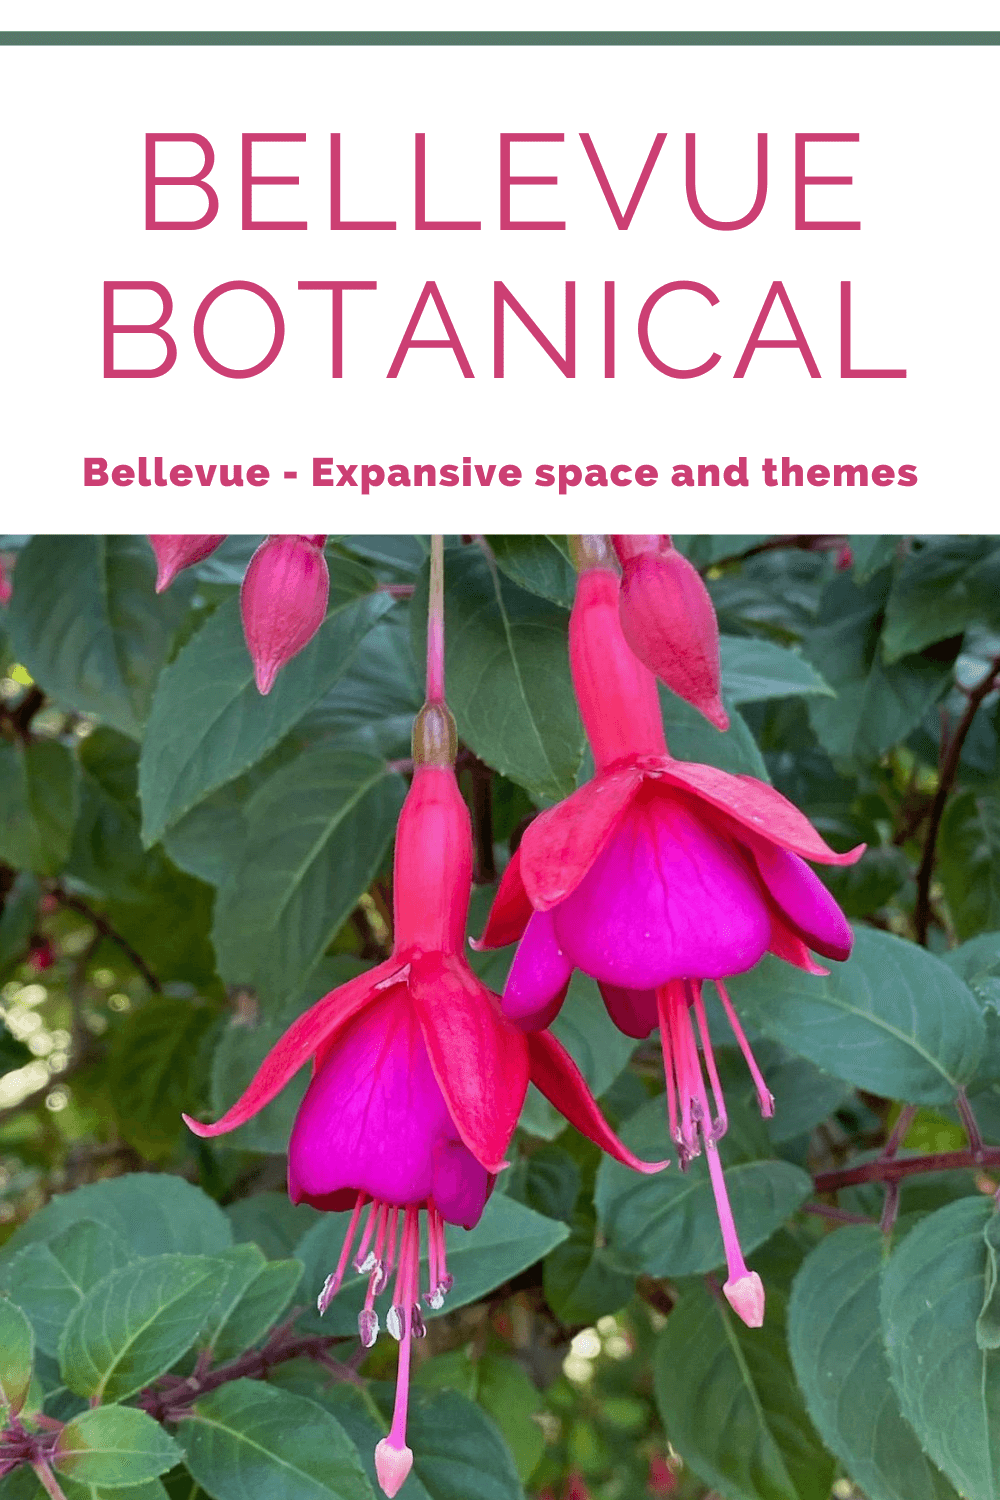 Bellevue Botanical Gardens are a delight for visitors seeking a Seattle area garden to explore. In this photo two bright pink fuchsia blooms swing from the magenta branches and dark green leaves that have lighter yellow veins showing.